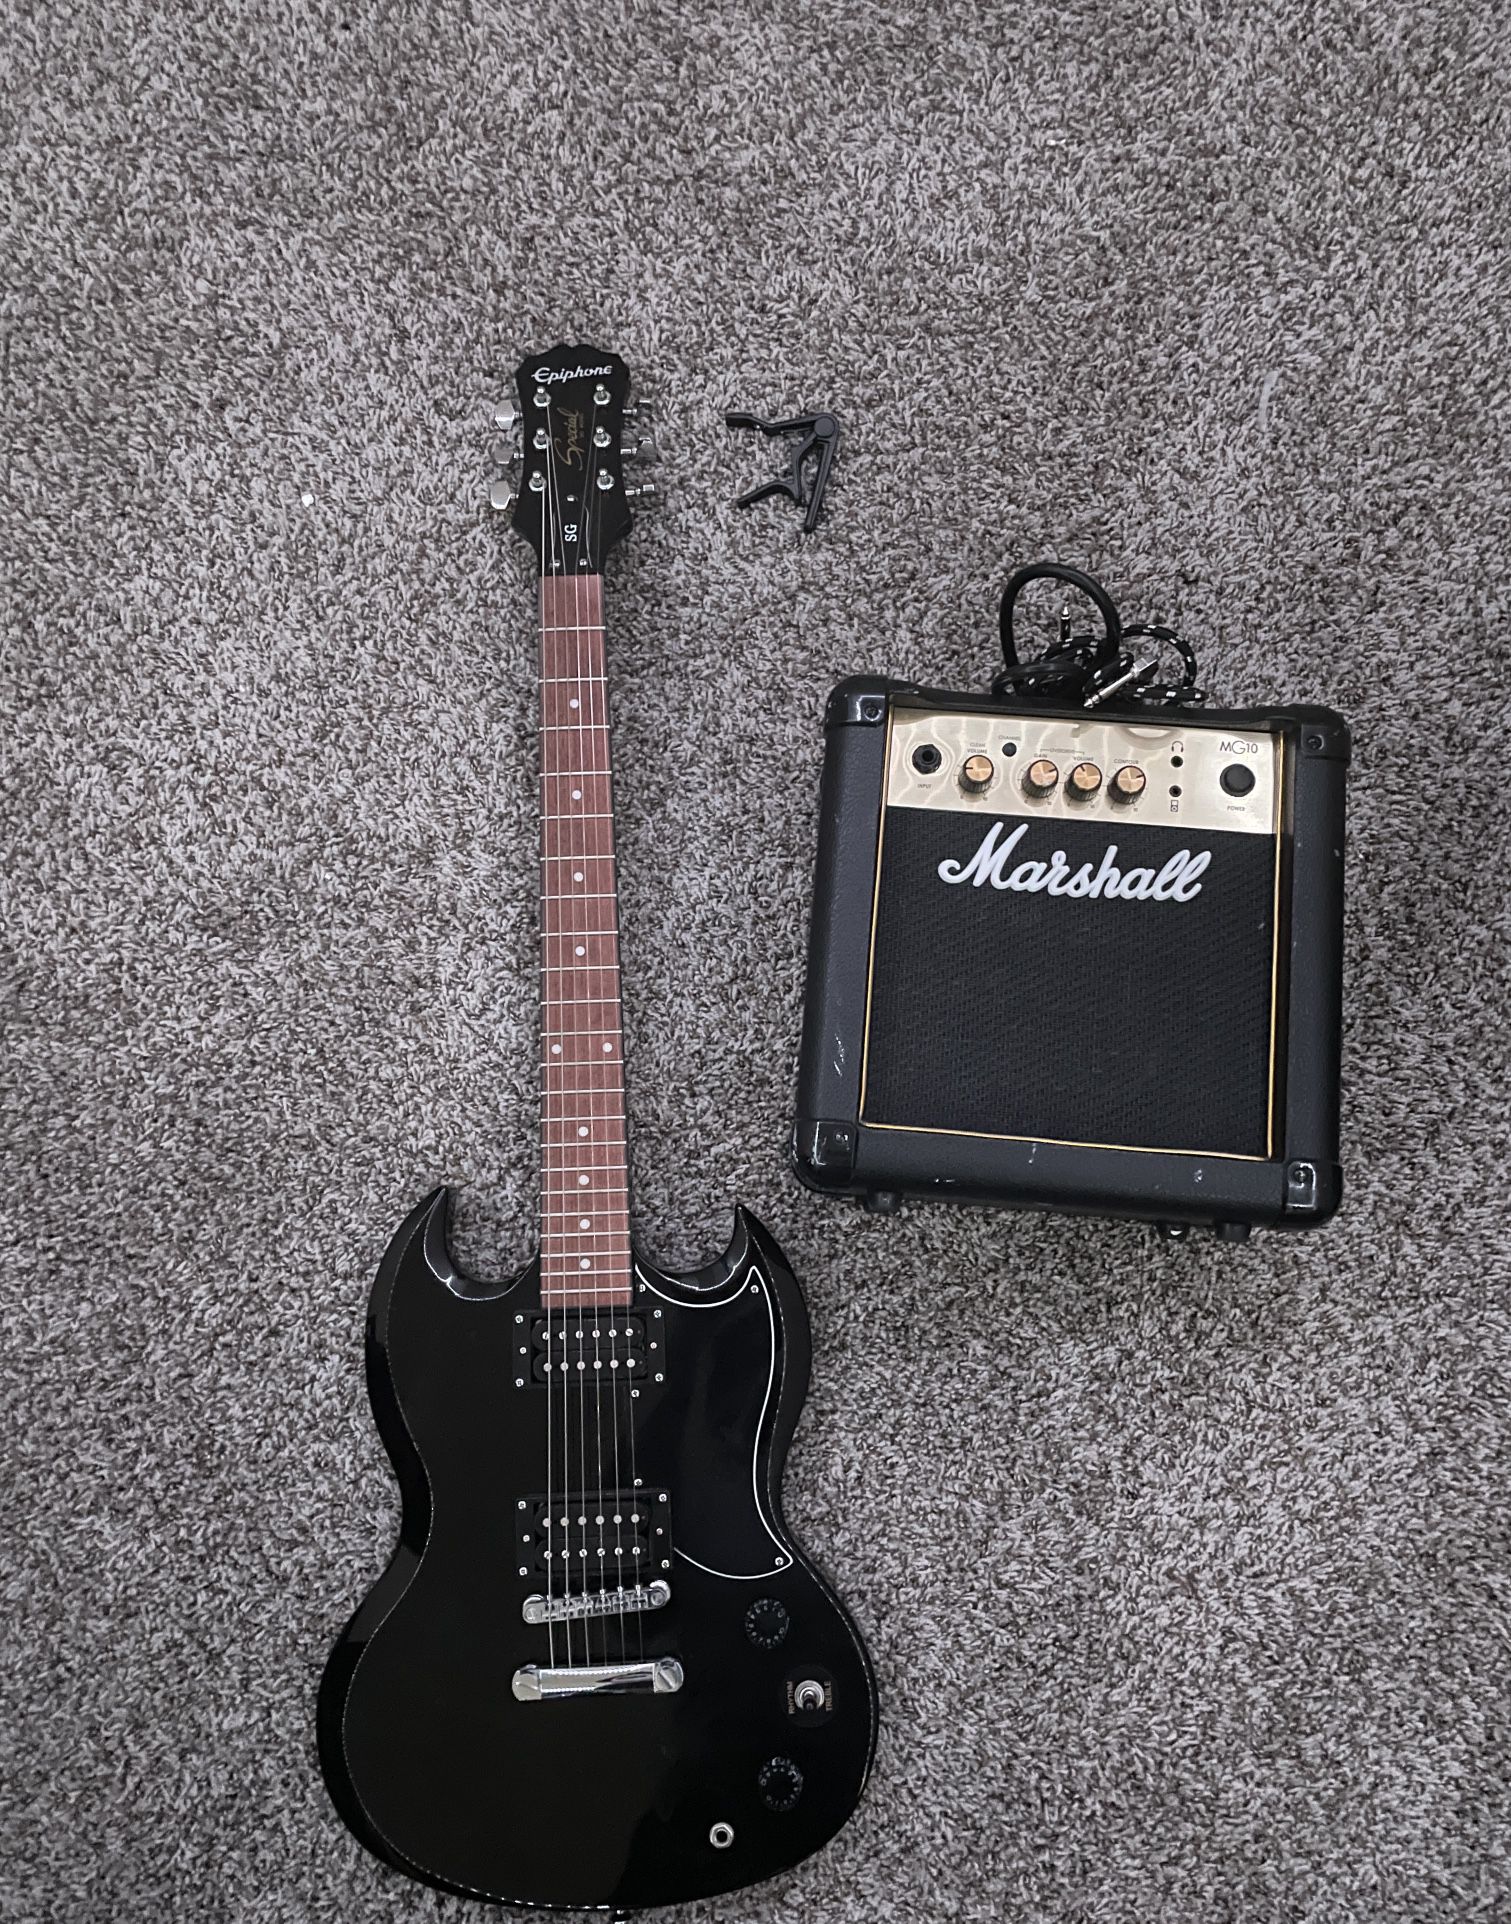 Epiphone SG Special & Marshall Combo Amp